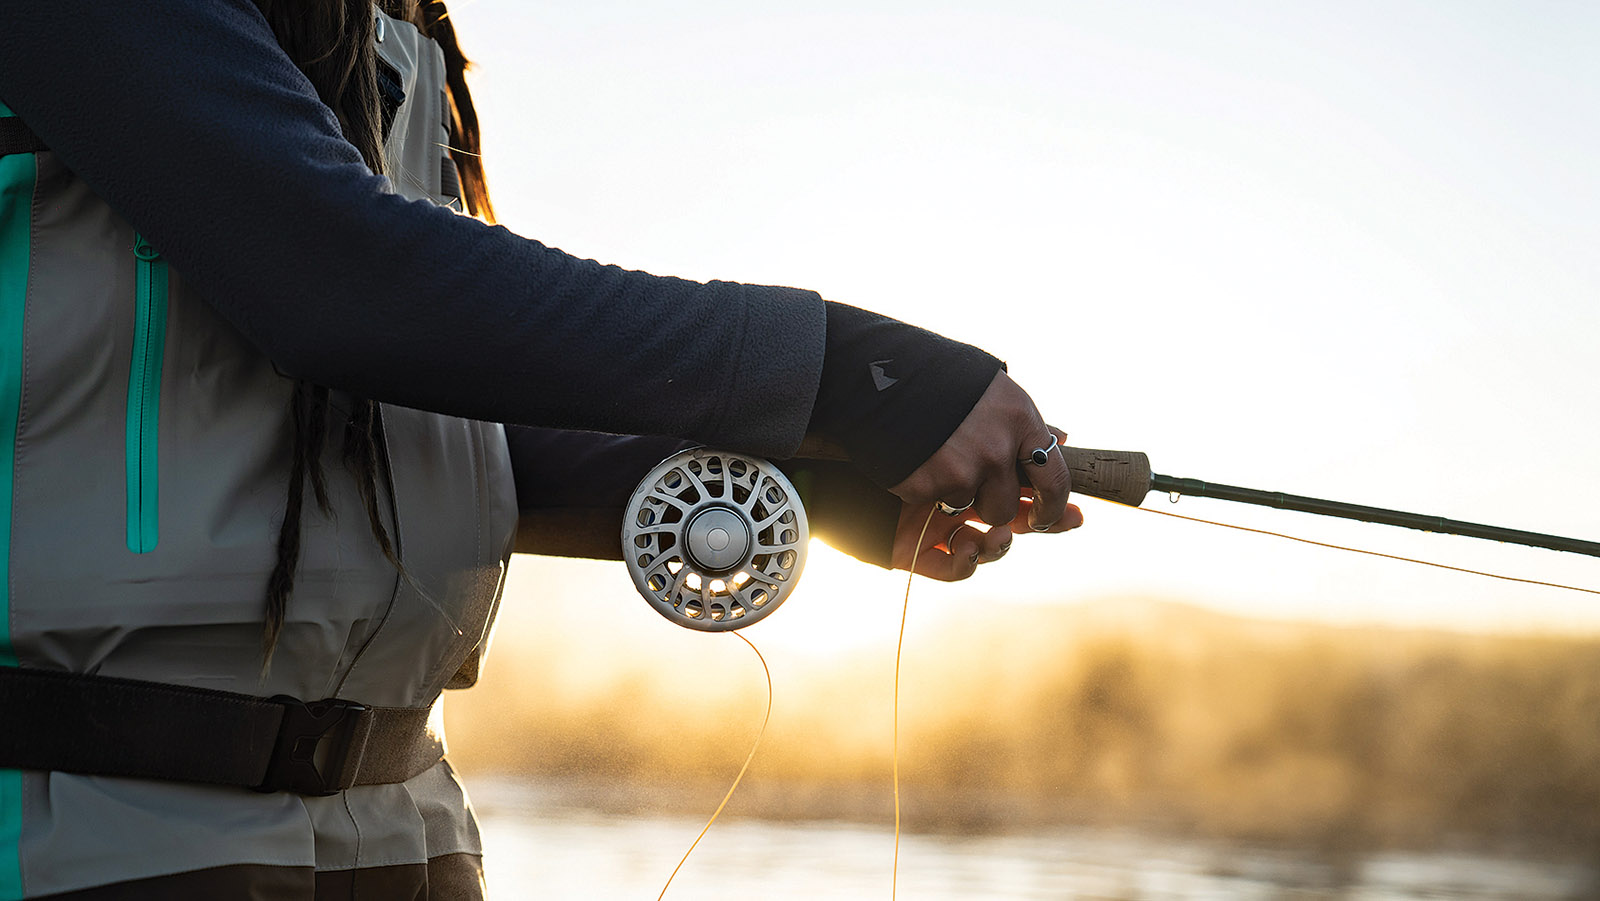 Fly Fishing Rod Outfits by Montana Casting Co.